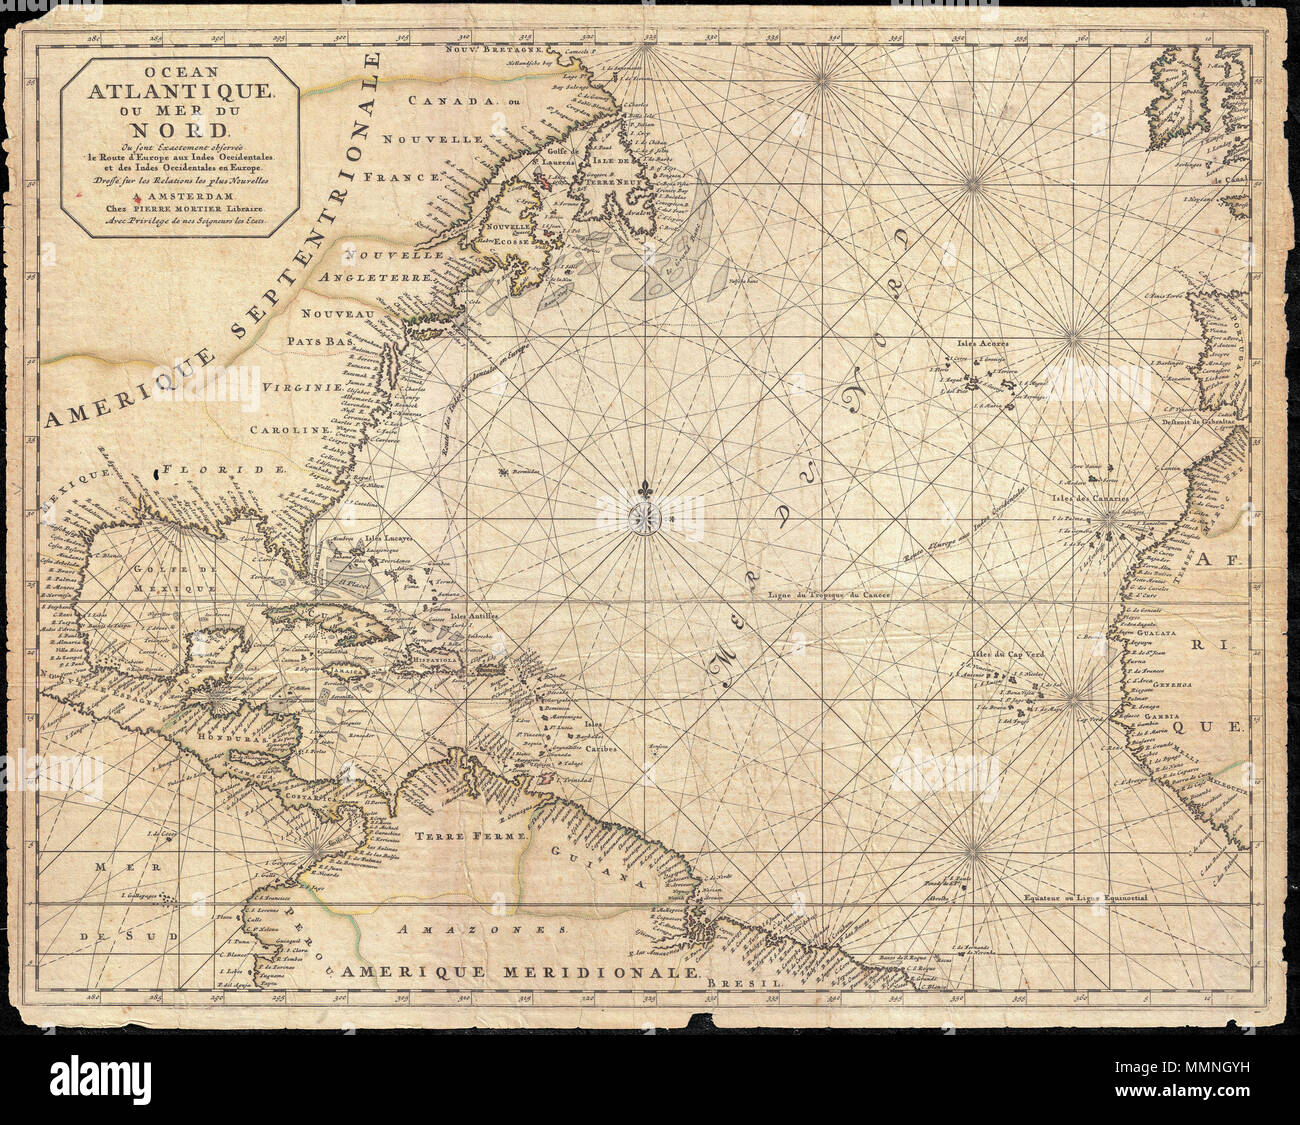 .  English: This is a rare and remarkable 1693 nautical chart of the Atlantic Ocean by Pierre Mortier. Covers the North Atlantic from rough 5 degree south latitude to roughly 56 degrees north latitude. Includes much of North America, all of the West Indies and Caribbean, Central America, the northern parts of South America, Western Africa, Ireland, and parts of Western Spain. As a whole Mortier's map presents a moderately accurate picture of the Americas. The coast lines, particularly in North America are a unnaturally craggy. Florida takes on an inverted cone aspect. The barrier islands and c Stock Photo